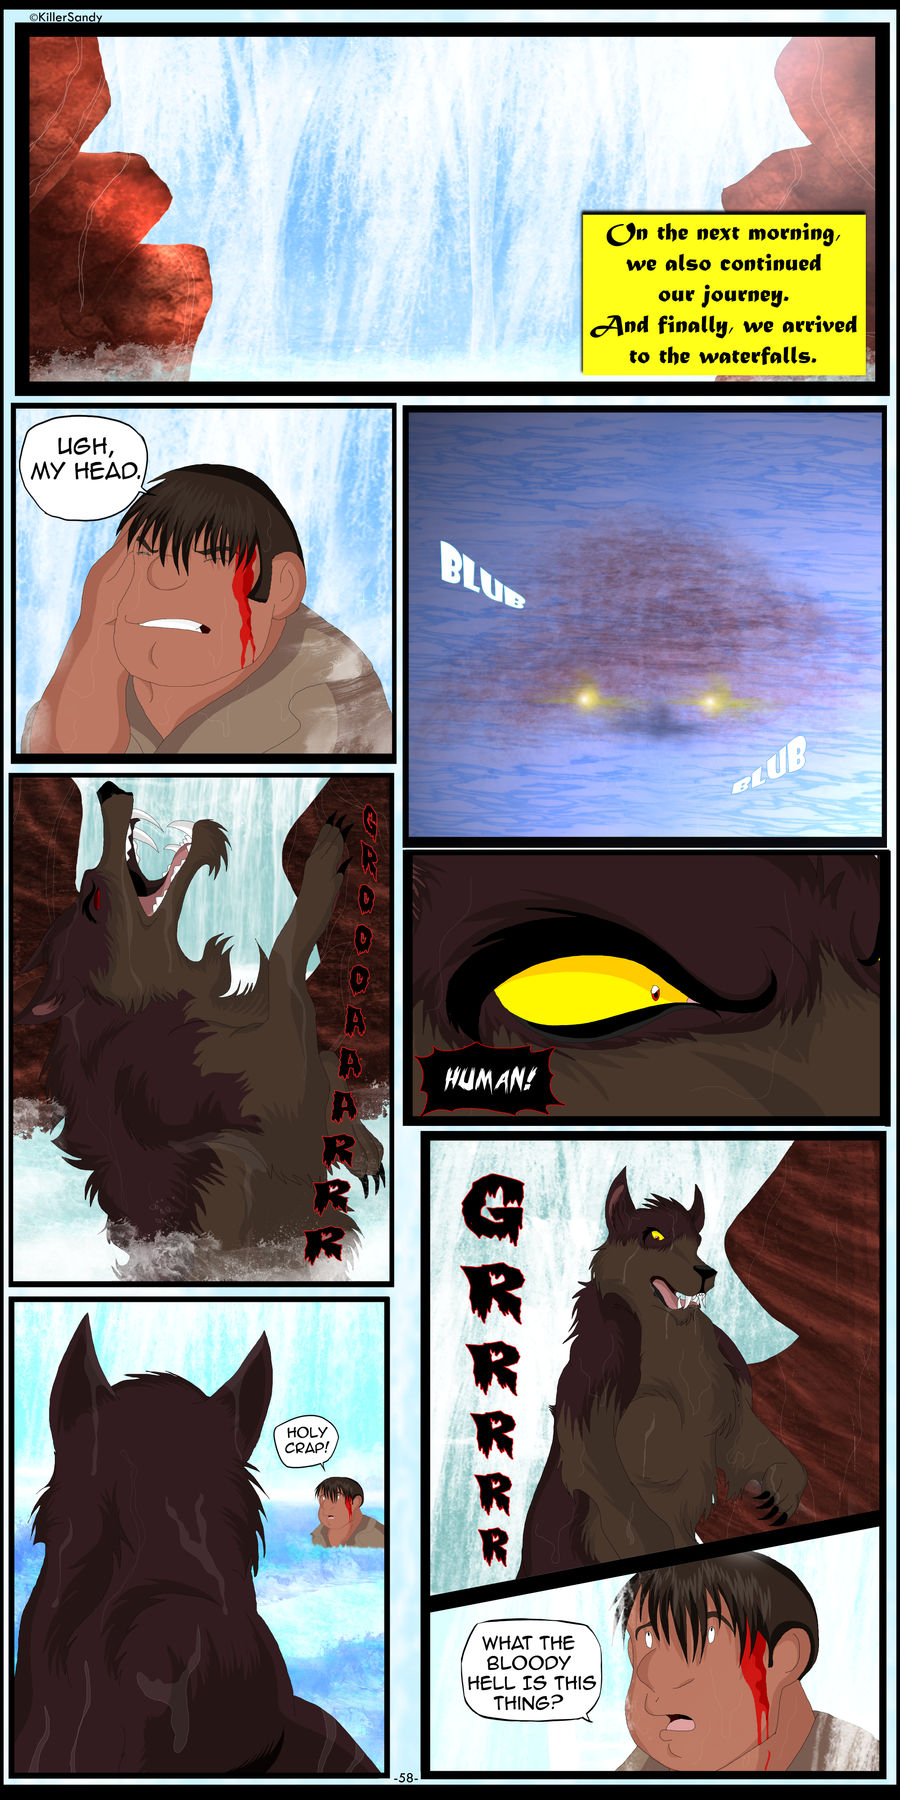 The Prince of the Moonlight Stone page 58